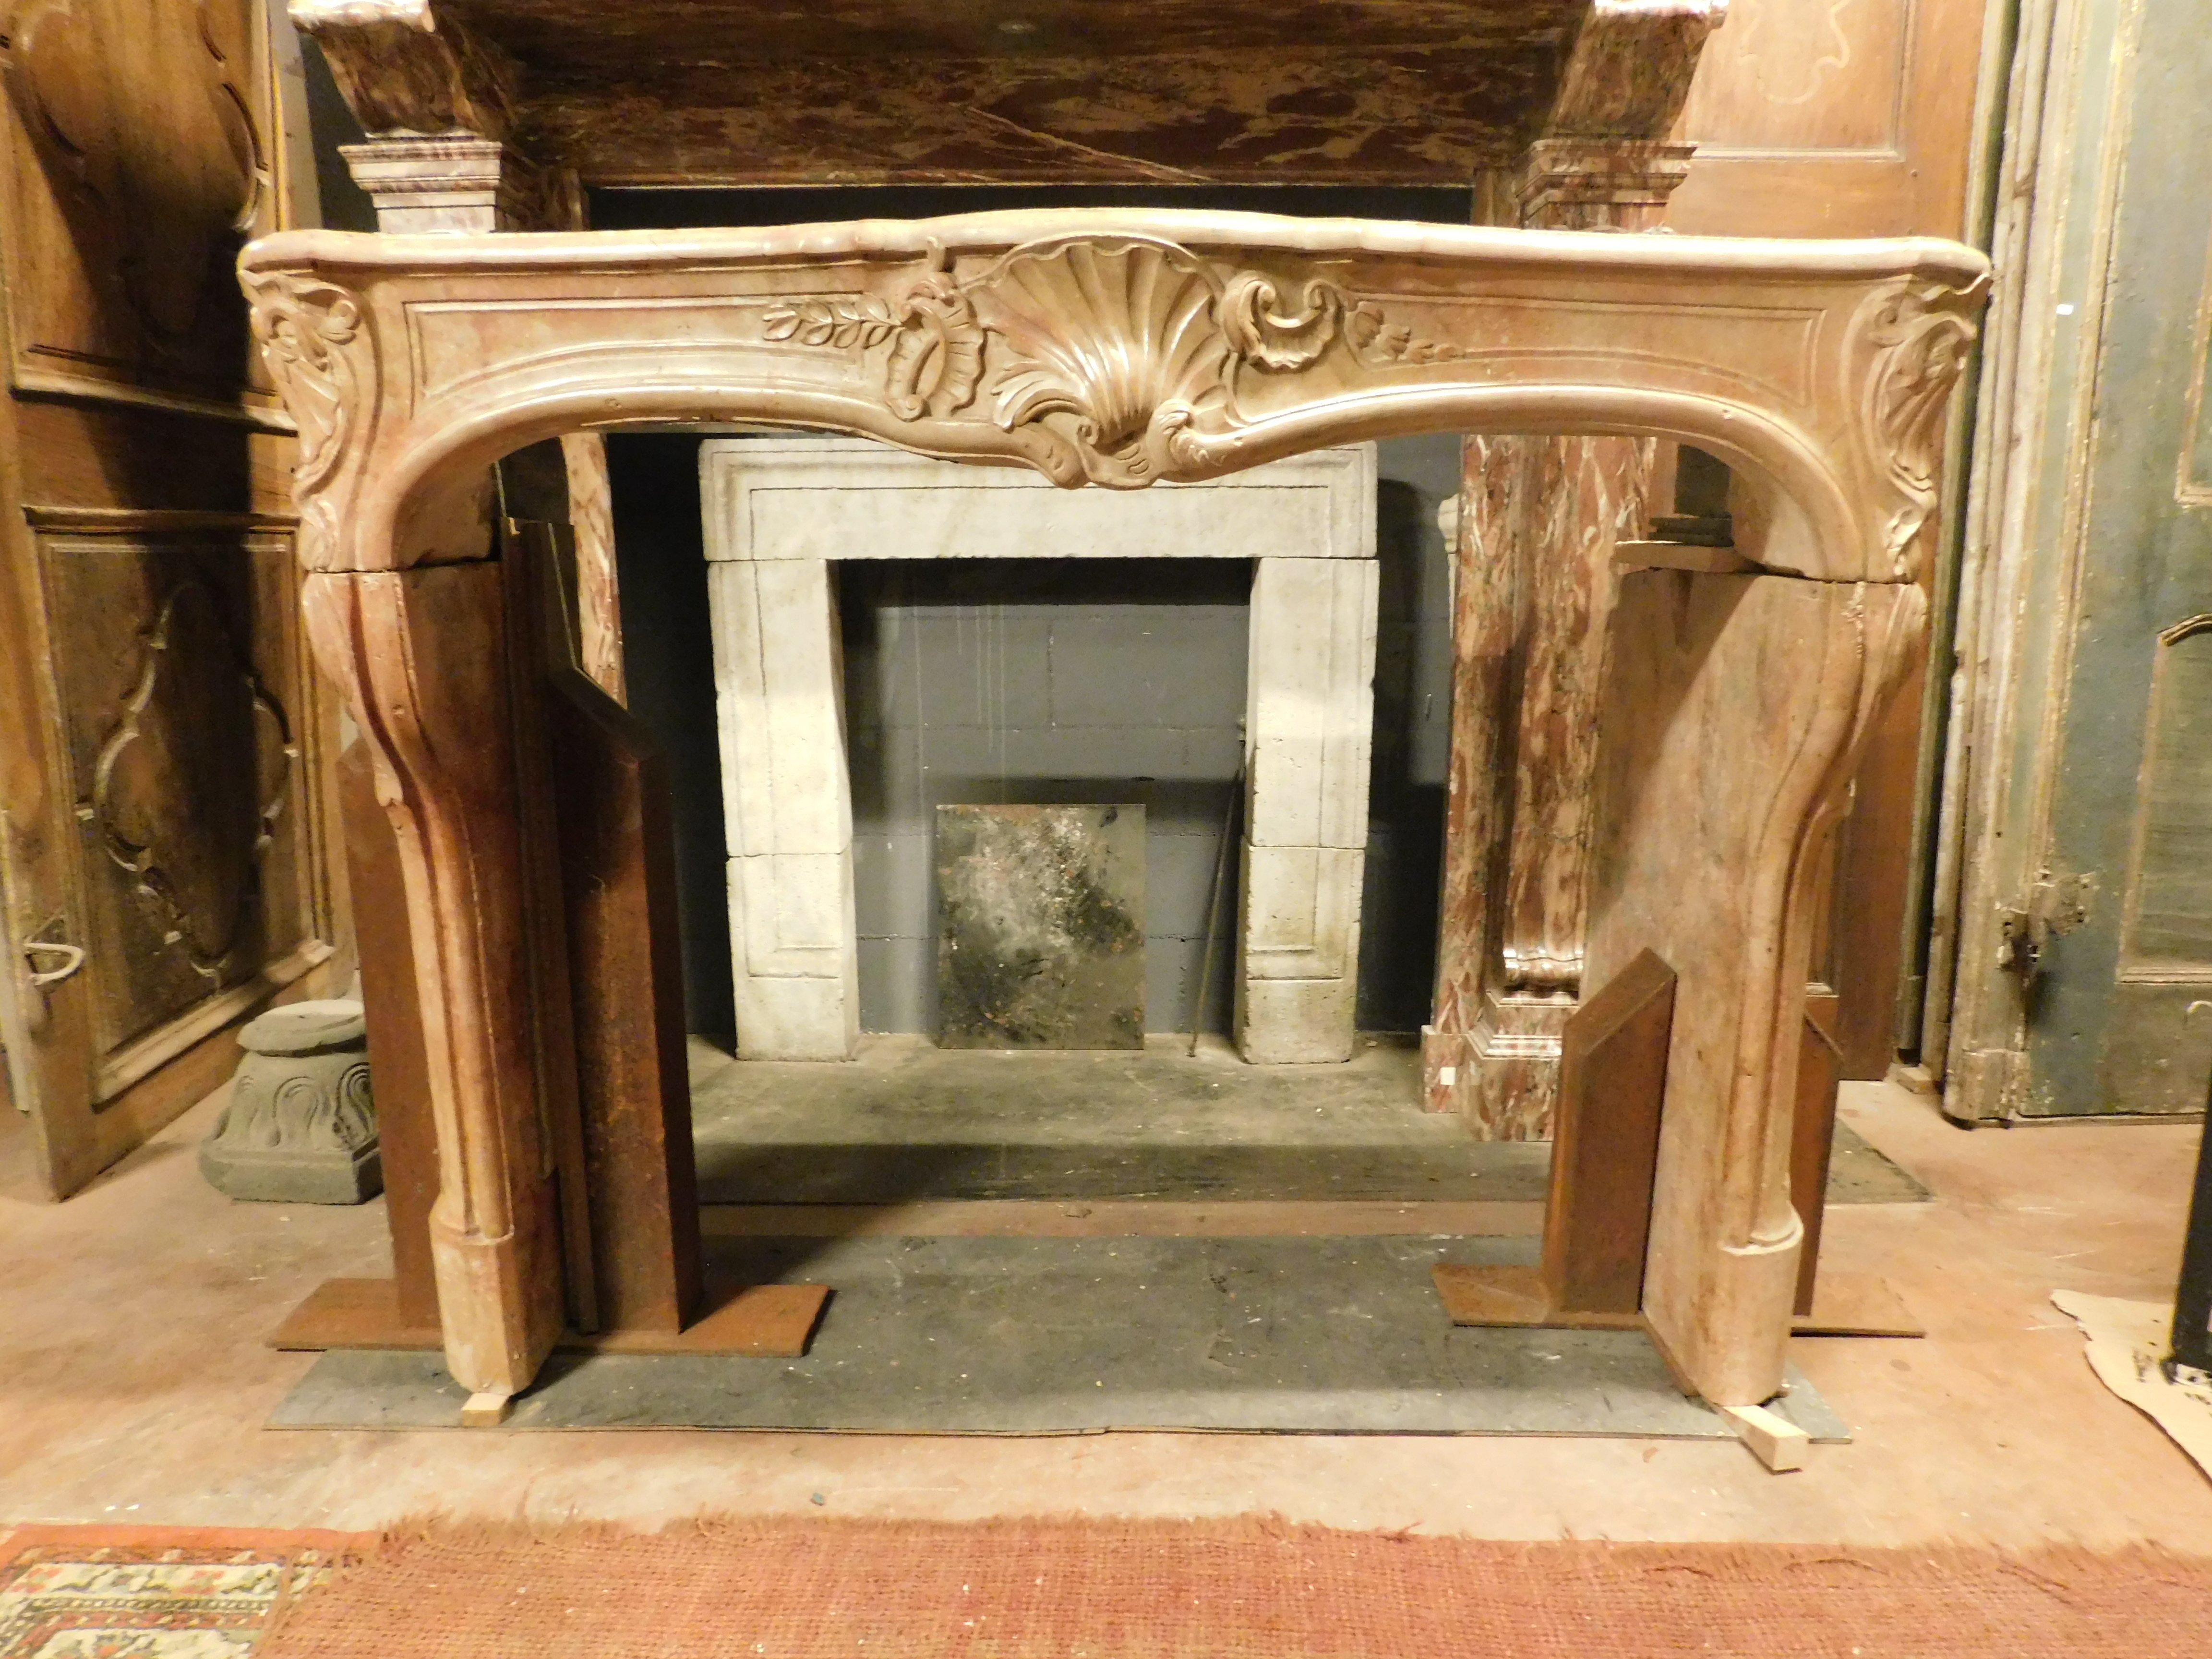 Ancient fireplace mantle, hand-sculpted with central shell and floral decorations on the legs, in precious 